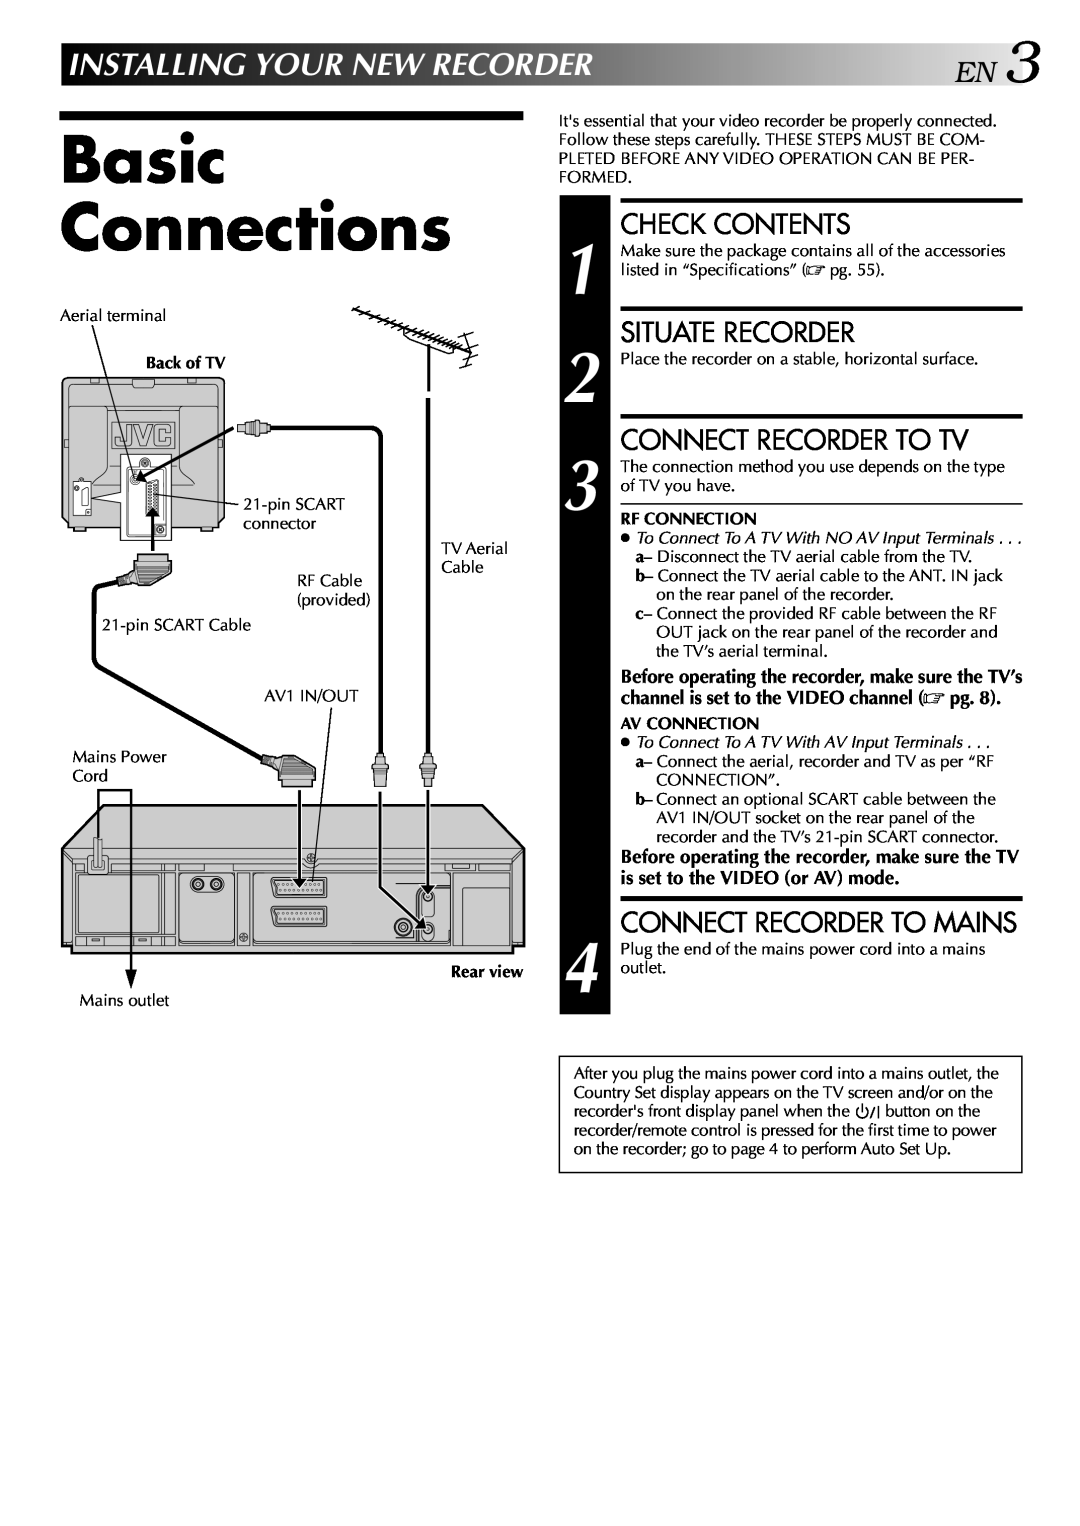 JVC HR-DD848E Basic Connections, Installingyournewrecorderen, Check Contents, Situate Recorder, Connect Recorder To Tv 